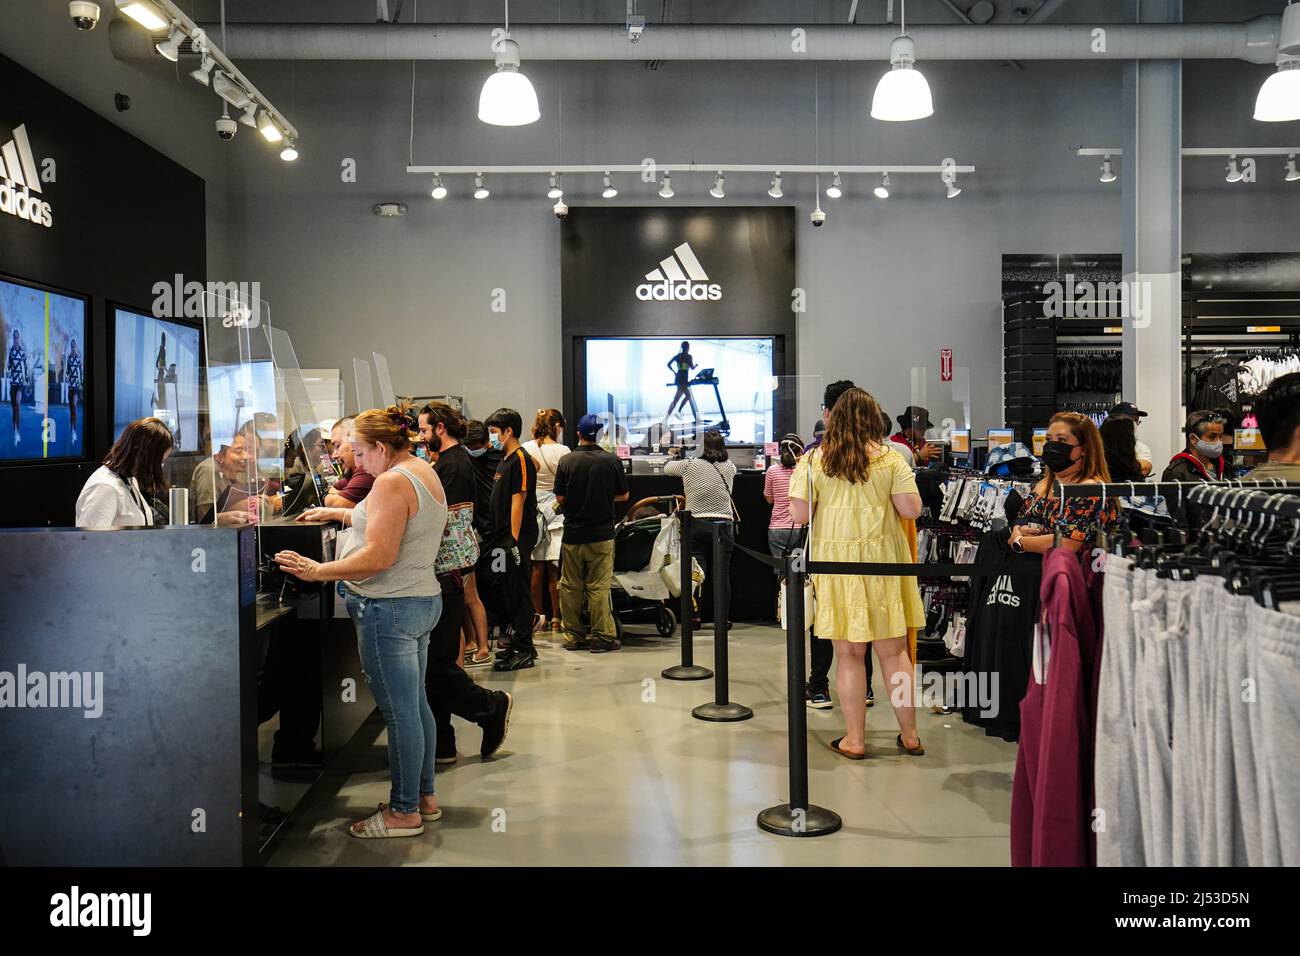 People seen inside an Adidas store at The Outlets in Orange. Many people shop at The Outlets in Orange, for shoes, and backpacks with a discounted price. According